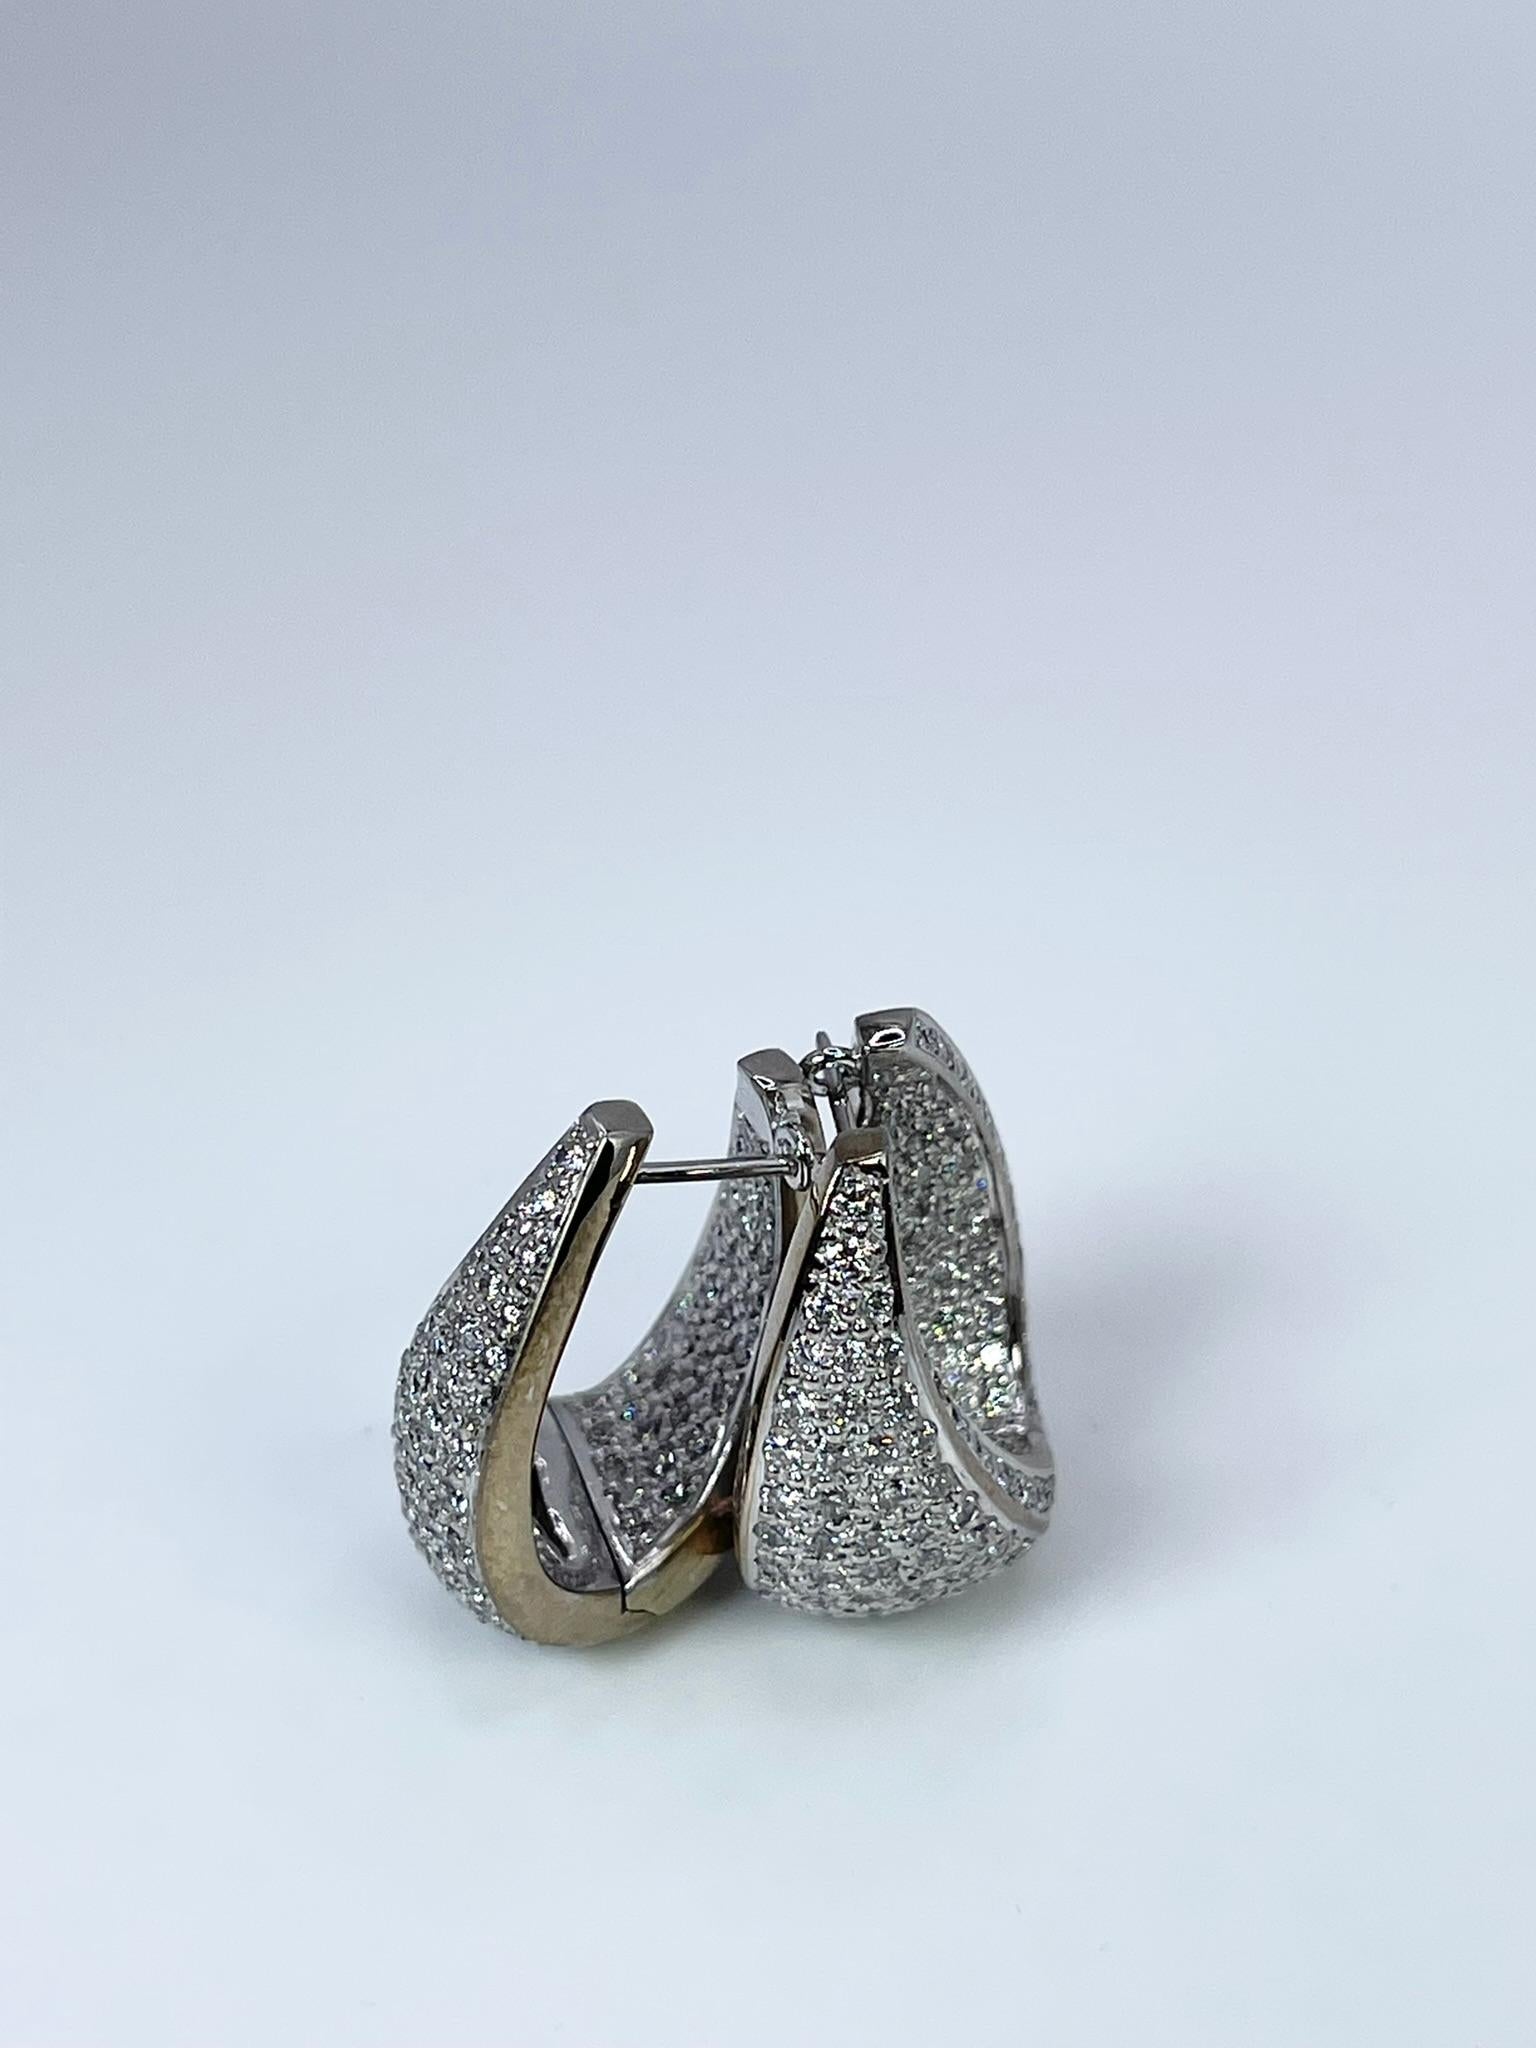 Gorgeous diamond earrings by JYE'S made with 4.25 carats of diamonds in 18KT white gold.

CENTER STONE: NATURAL DIAMONDS
CARAT: 4.25CT
CLARITY: VS
COLOR: F-G
CUT: ROUND BRILLIANT
STAMP: 18KT
GRAM WEIGHT: 22.61gr
GOLD: 18KT white gold
CLOSURE: